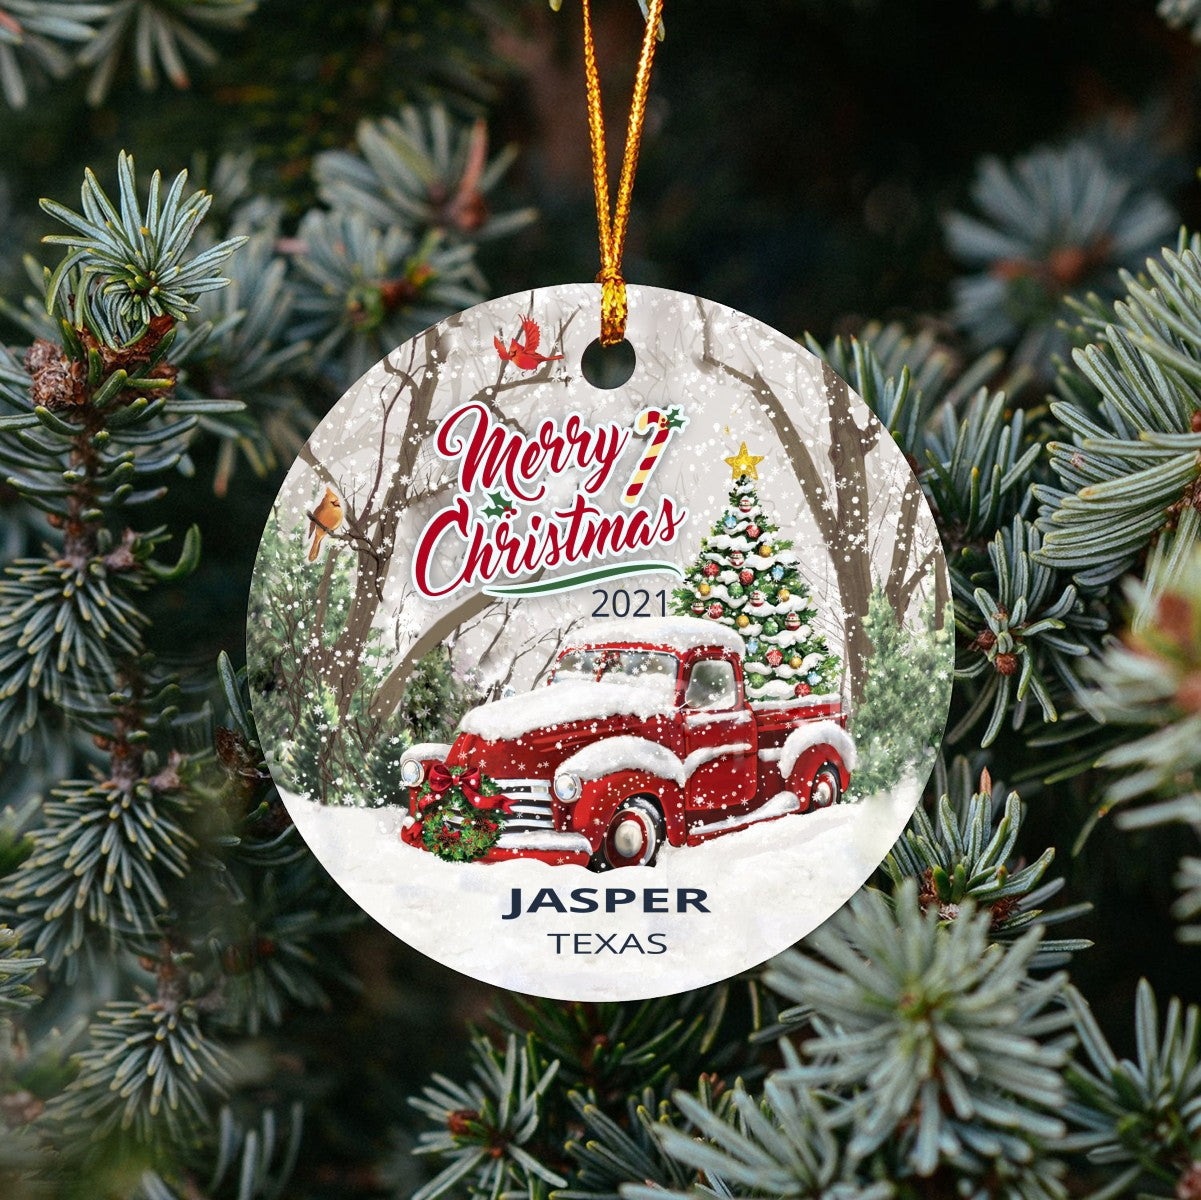 Christmas Tree Ornaments Jasper - Ornament With Name City, State Jasper Texas TX Ornament - Red Truck Xmas Ornaments 3'' Plastic Gift For Family, Friend And Housewarming